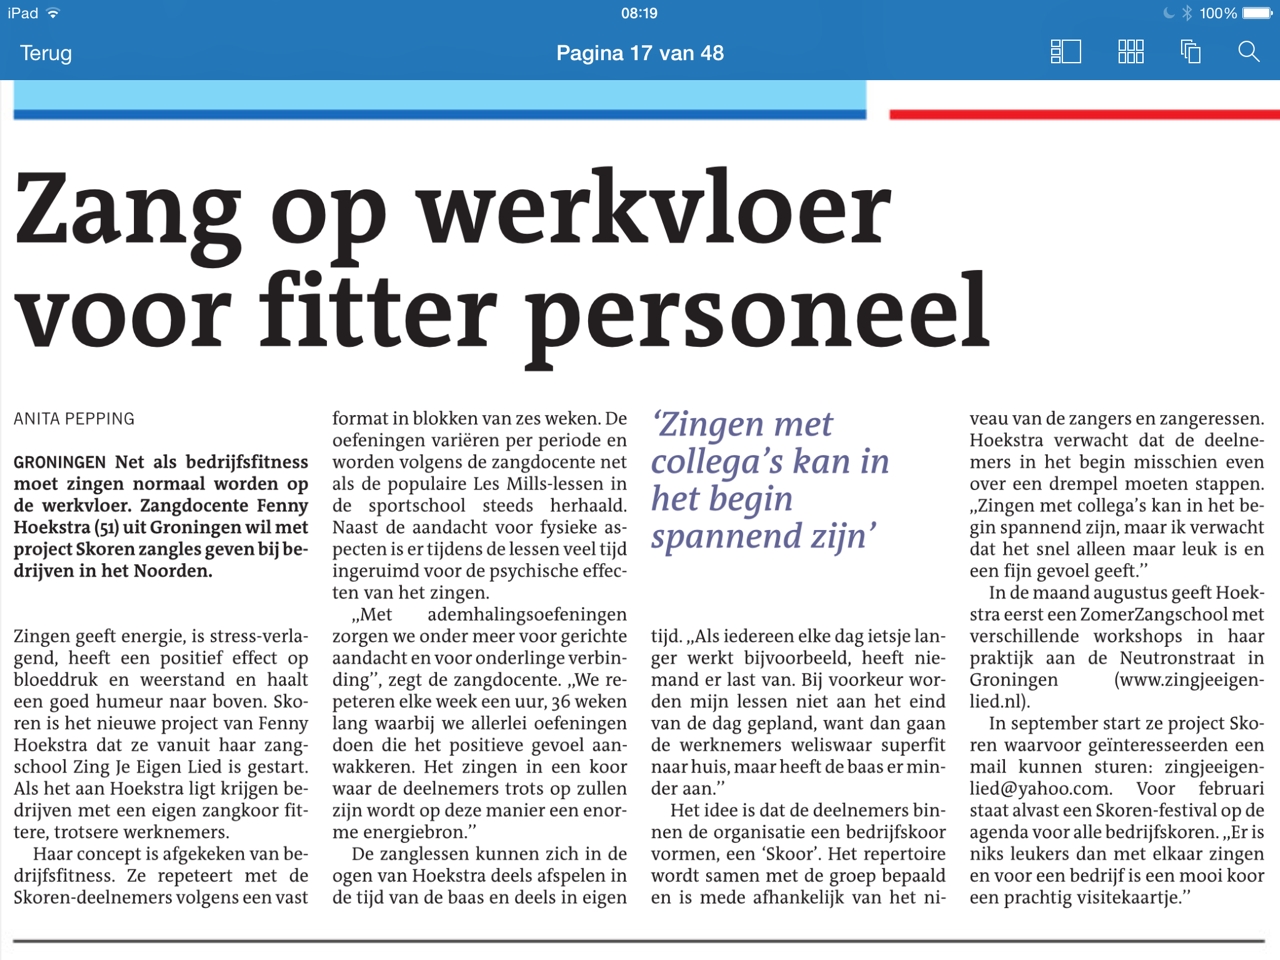 Article about singing at work (in Dutch)